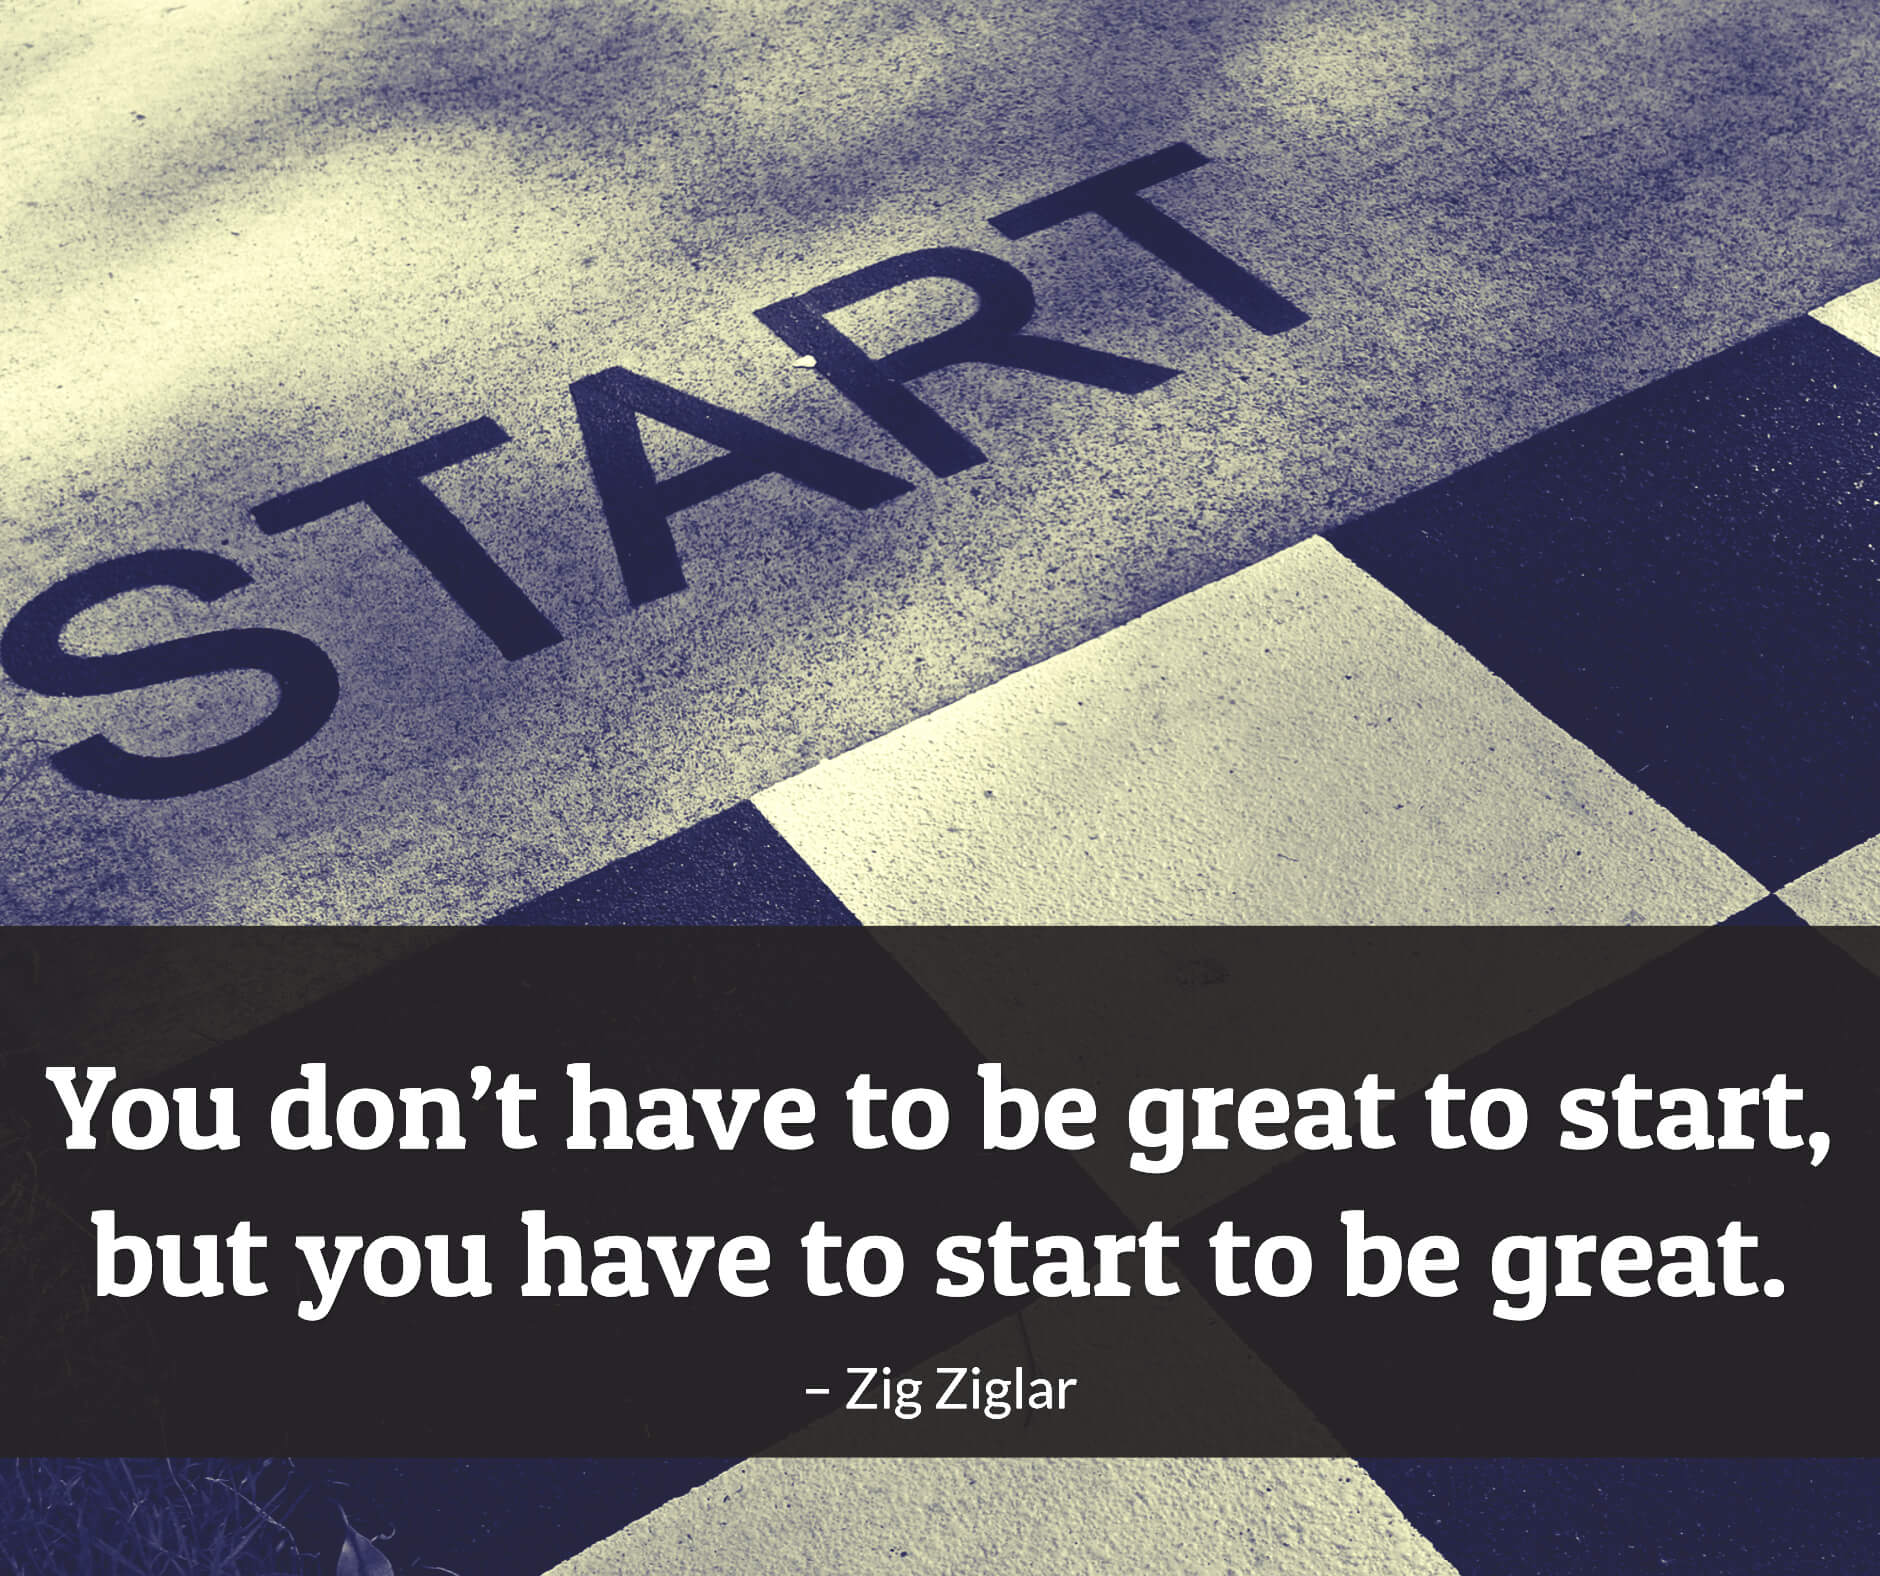 You don't have to be great to start but you have to start to be great.